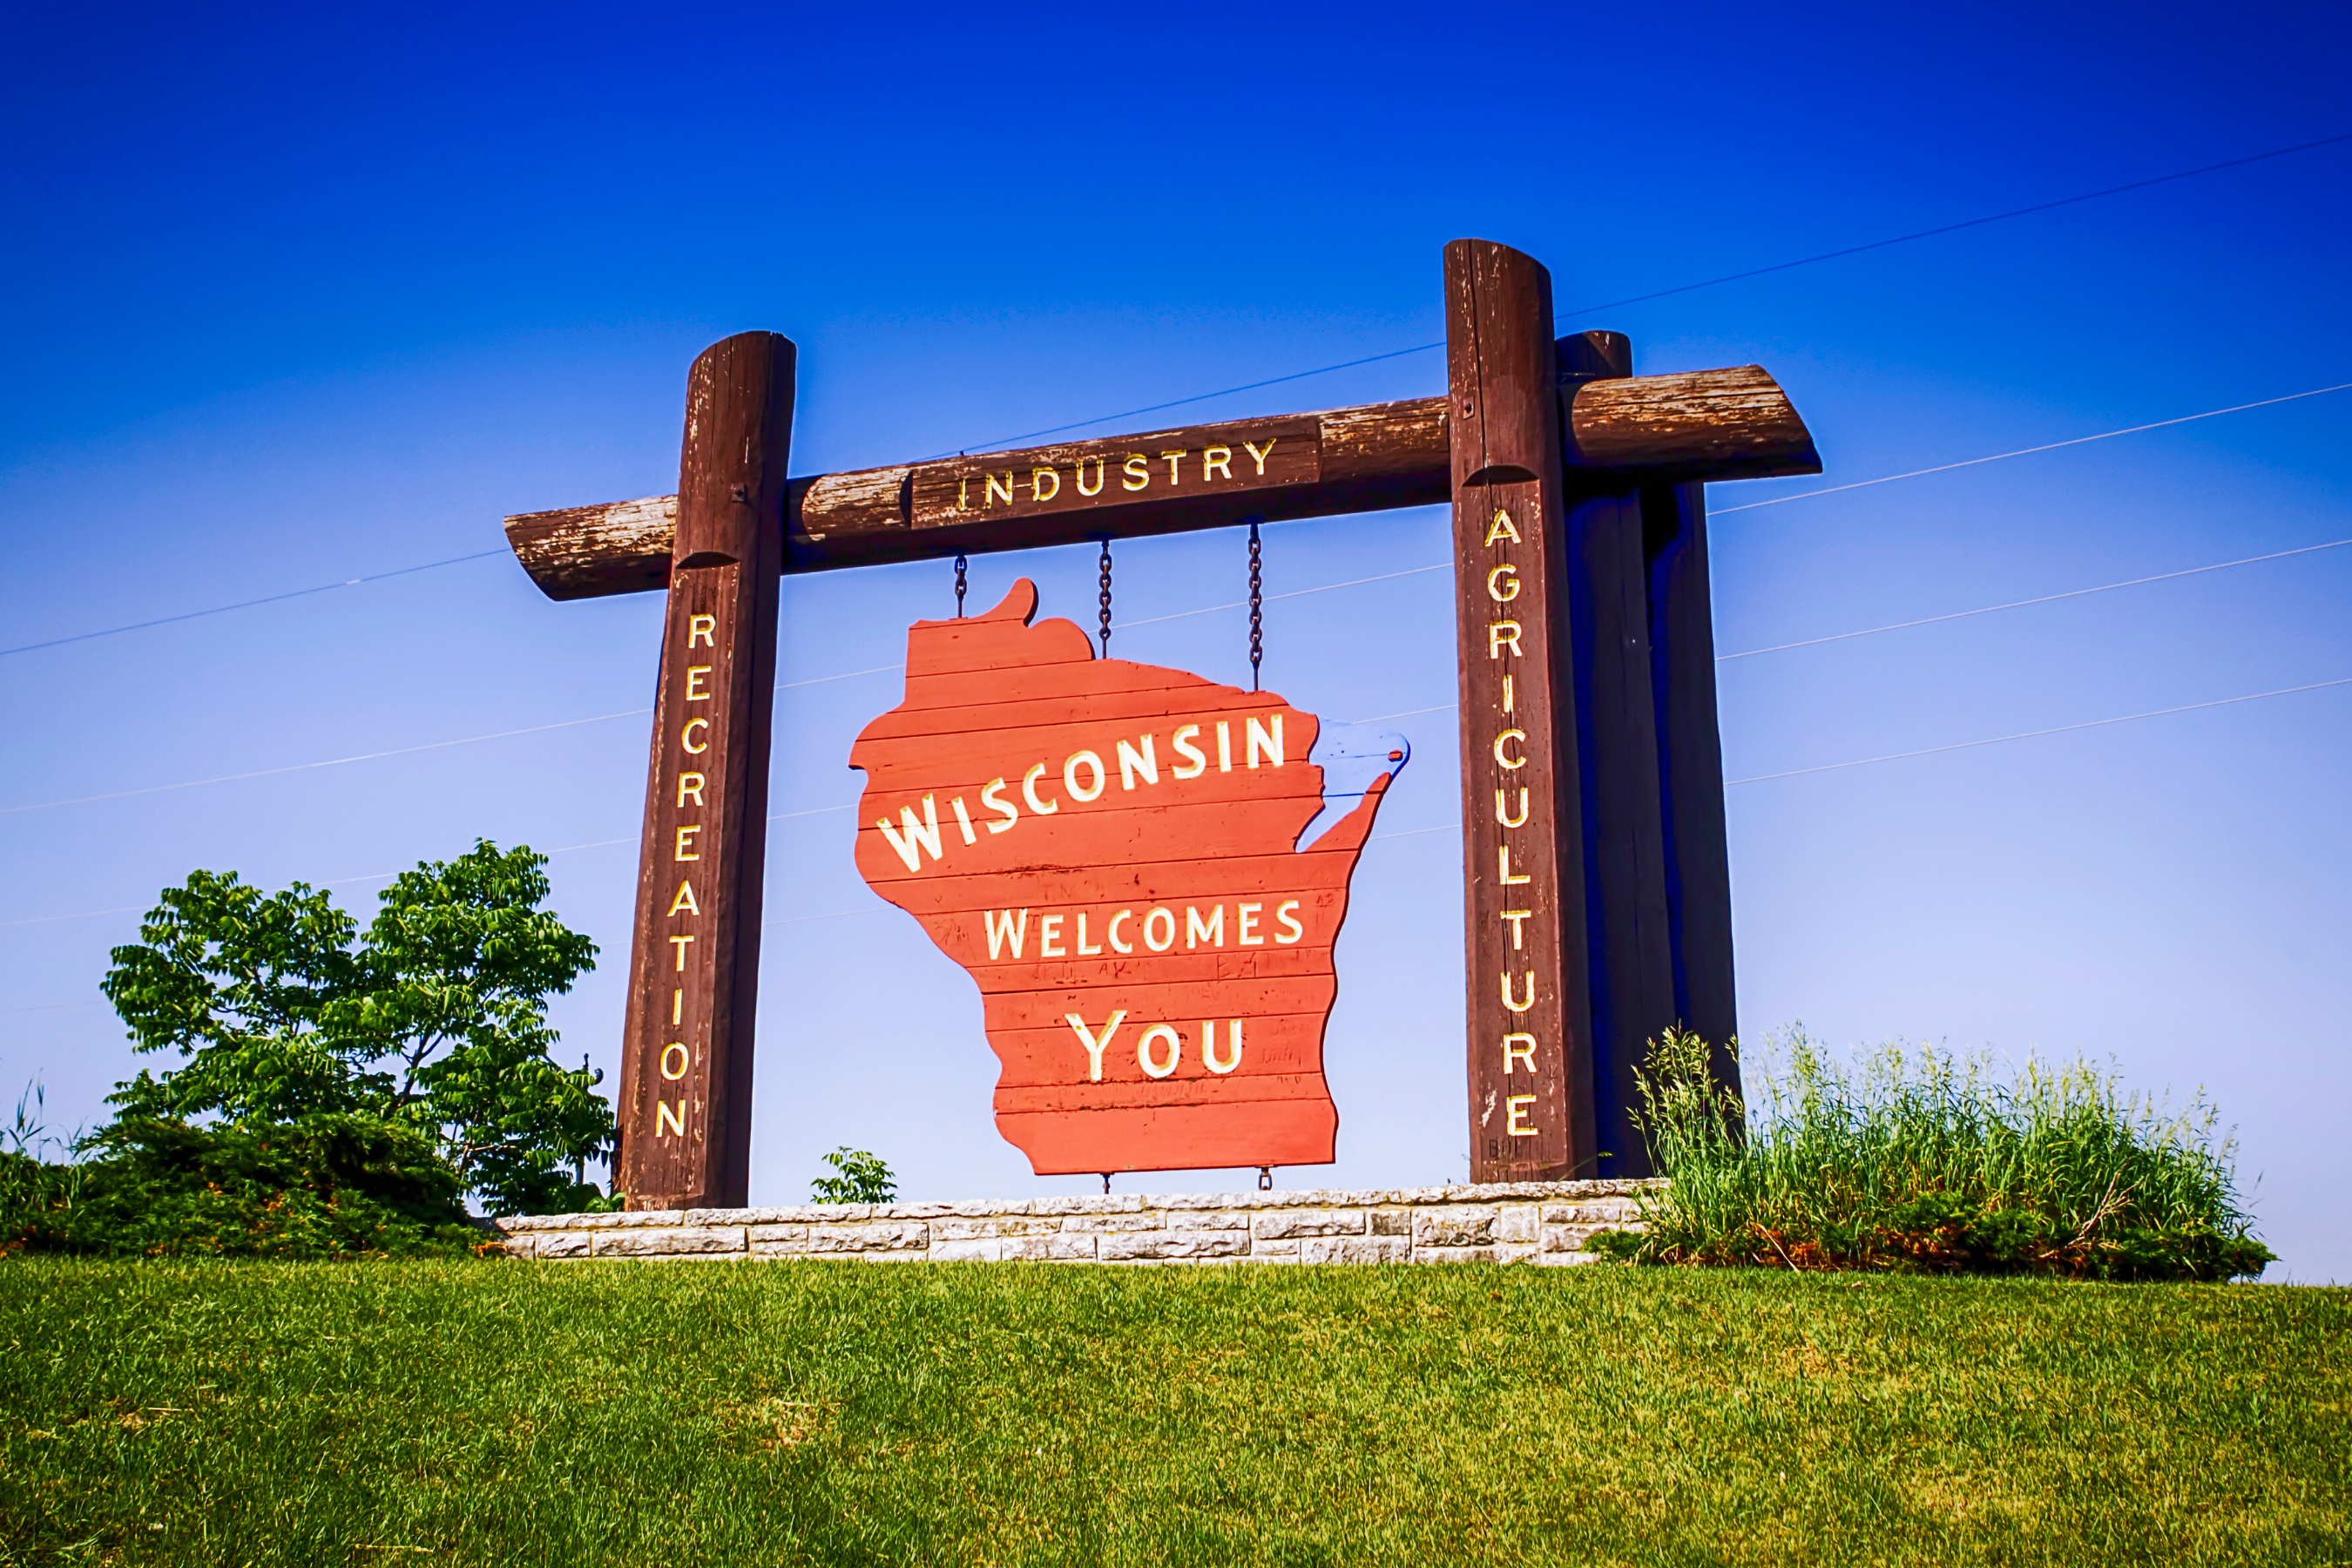 New to the area? Northeast Wisconsin Welcomes You